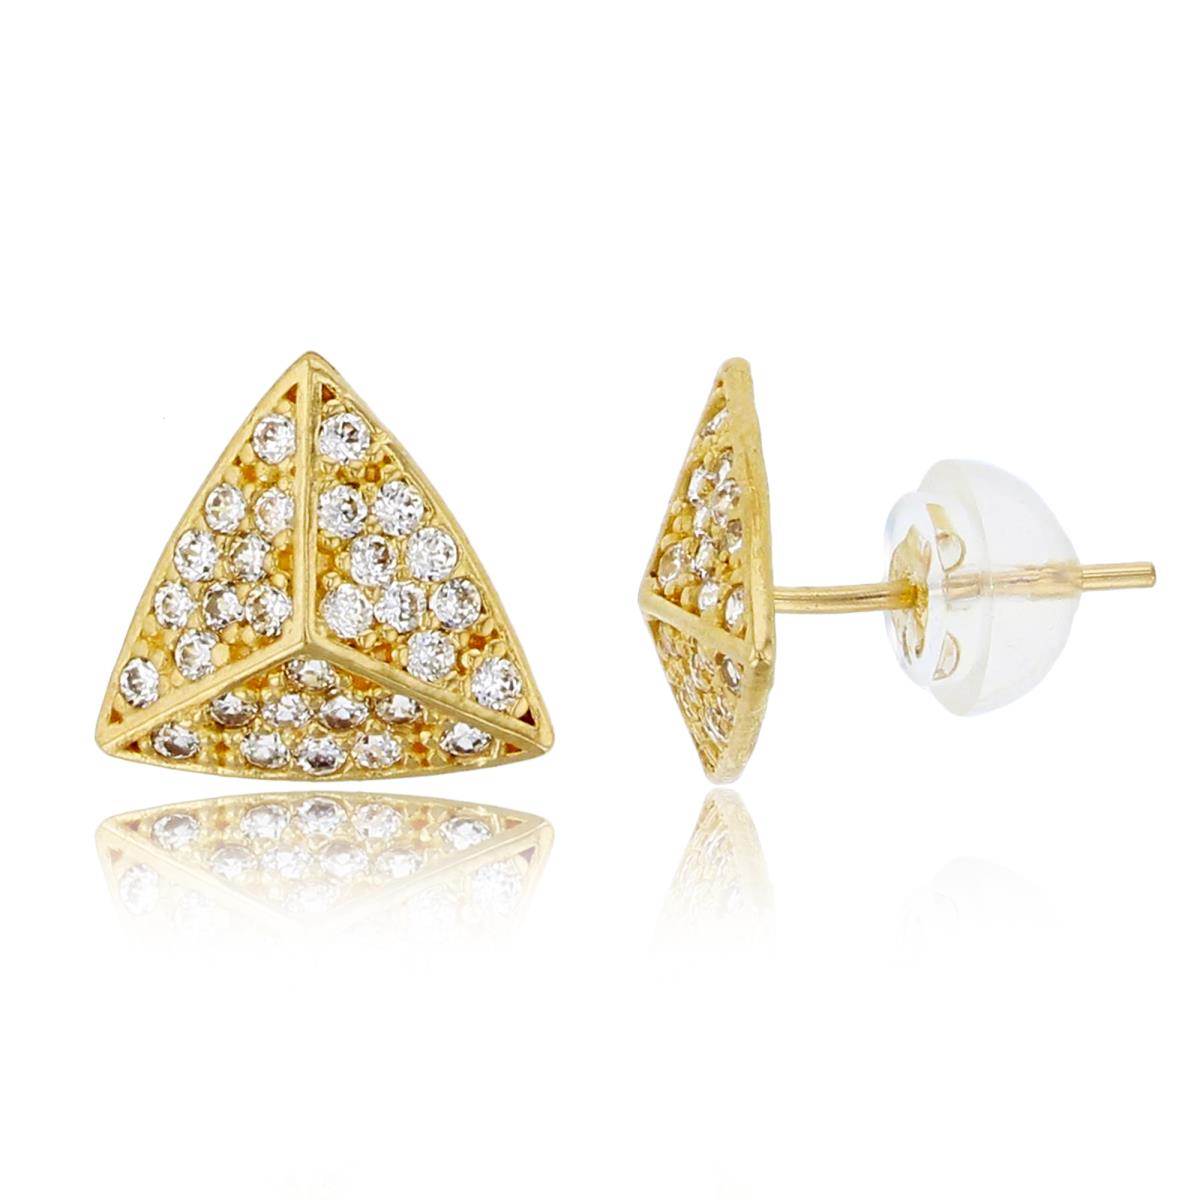 10K Yellow Gold 8x9mm Micropave Triangle Stud Earring